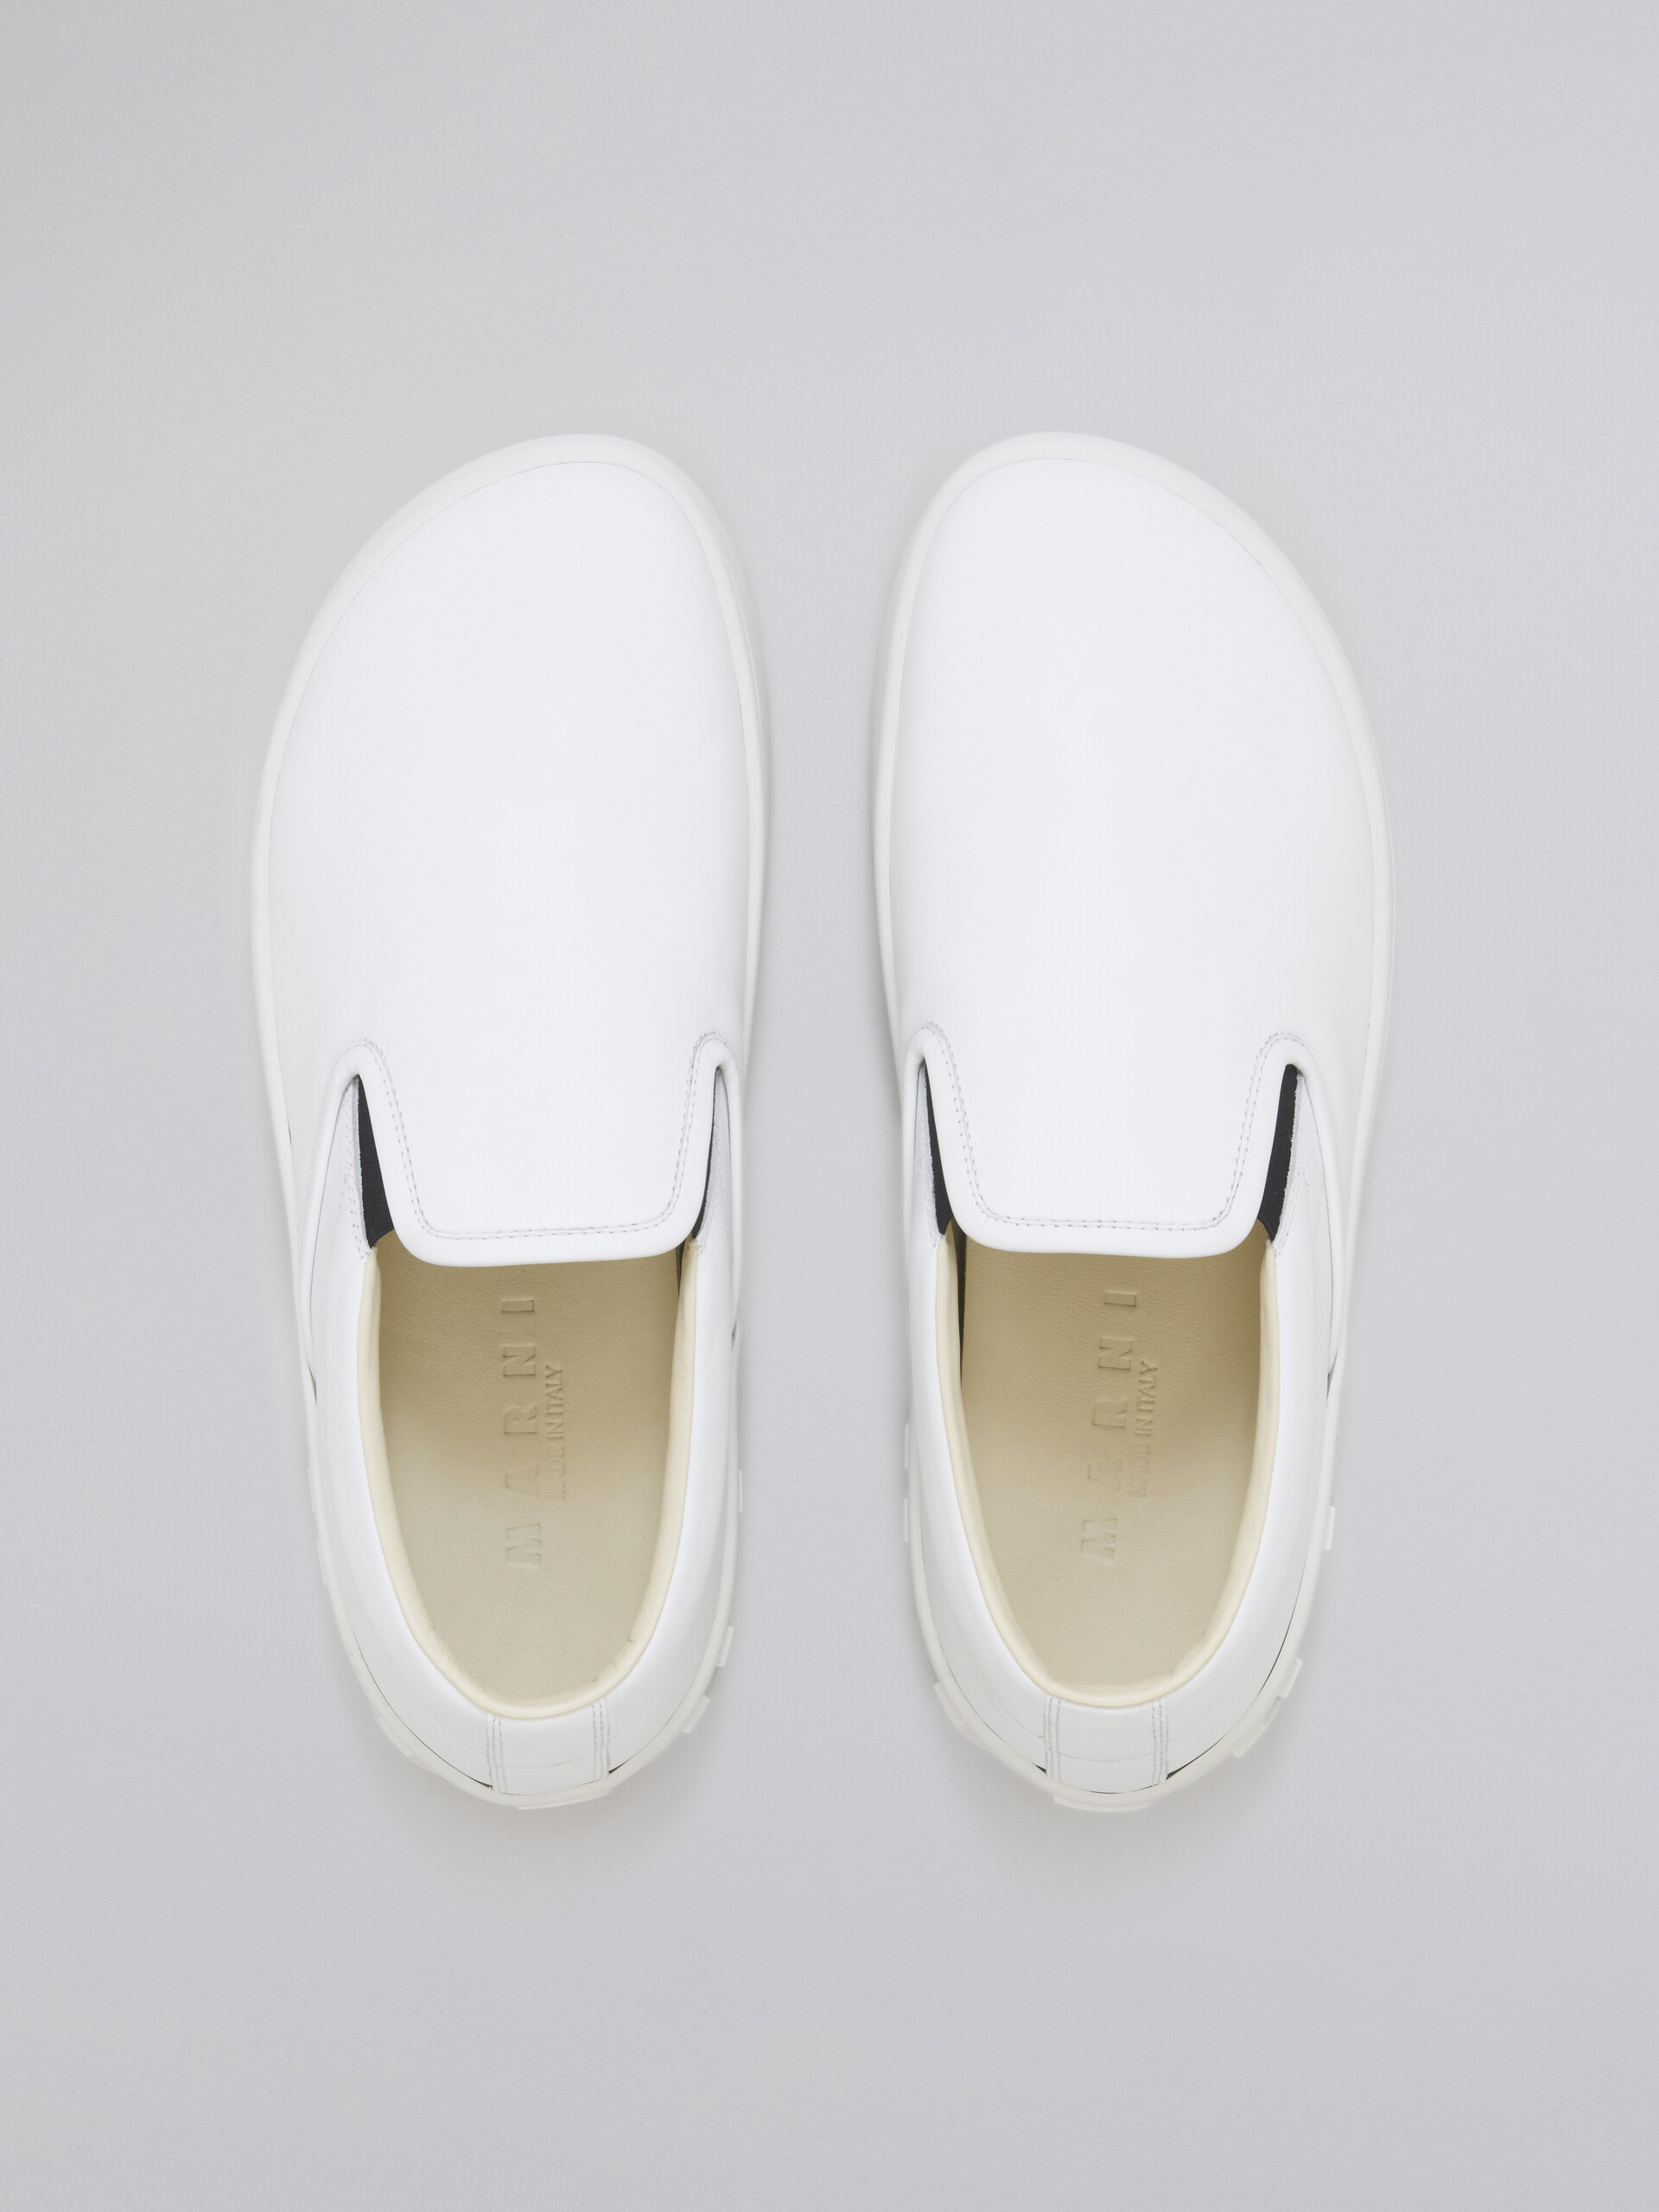 Calfskin slip-on sneaker with maxi logo on the heel - Sneakers - Image 4